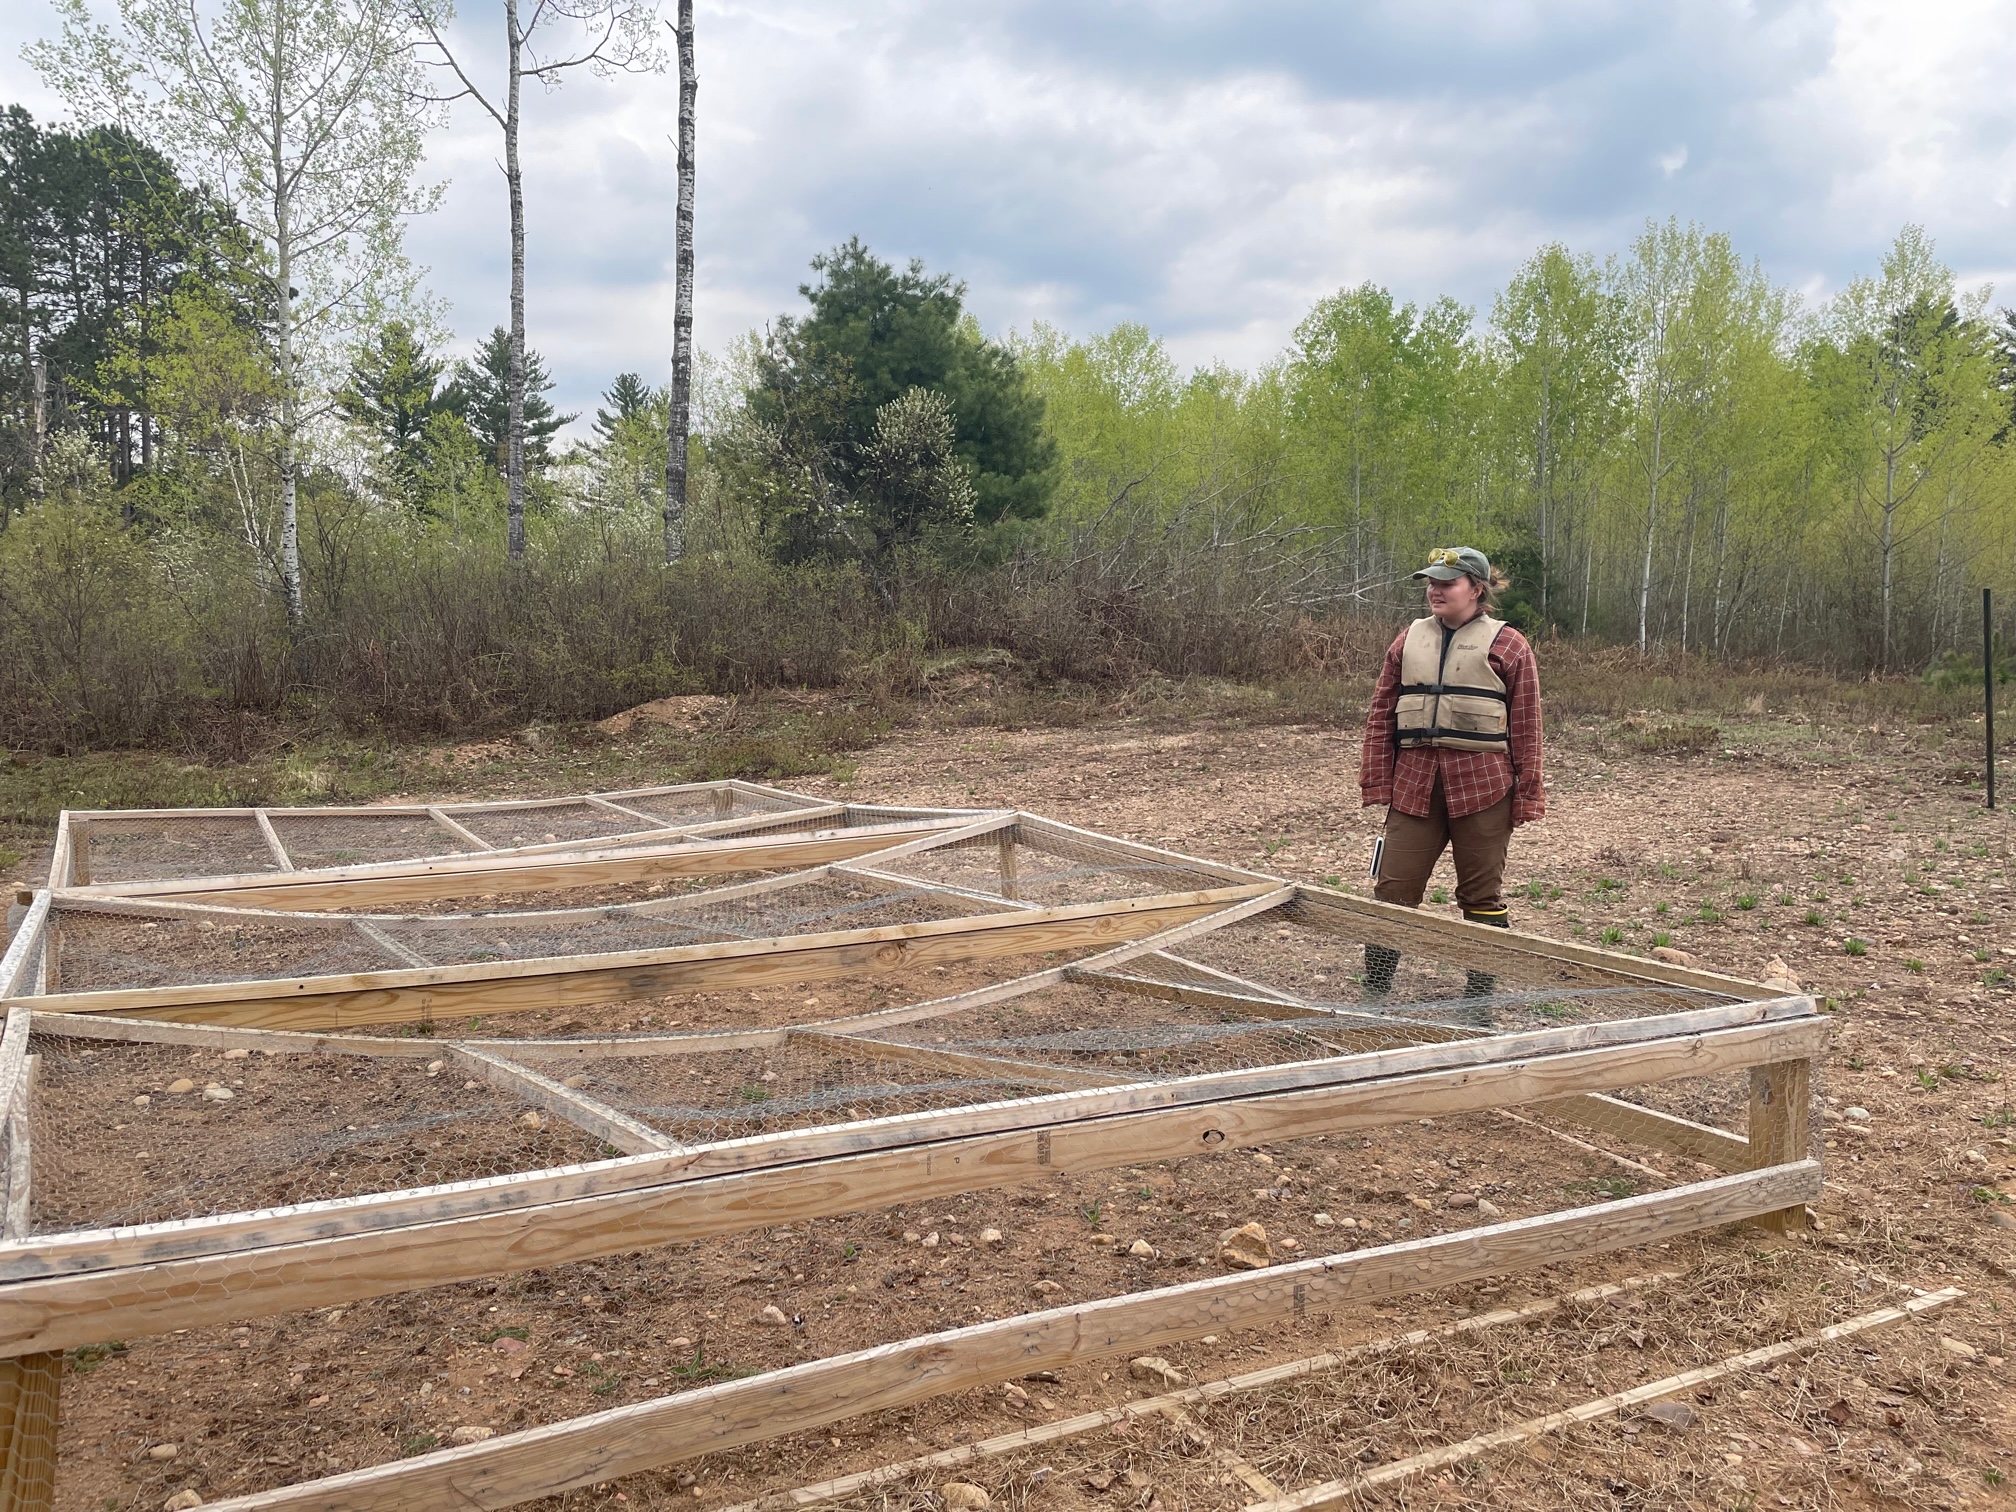 Conservation biologist Lena Carlson shows an enclosure created to protect the nests of wood turtles in the Northwoods of Wisconsin